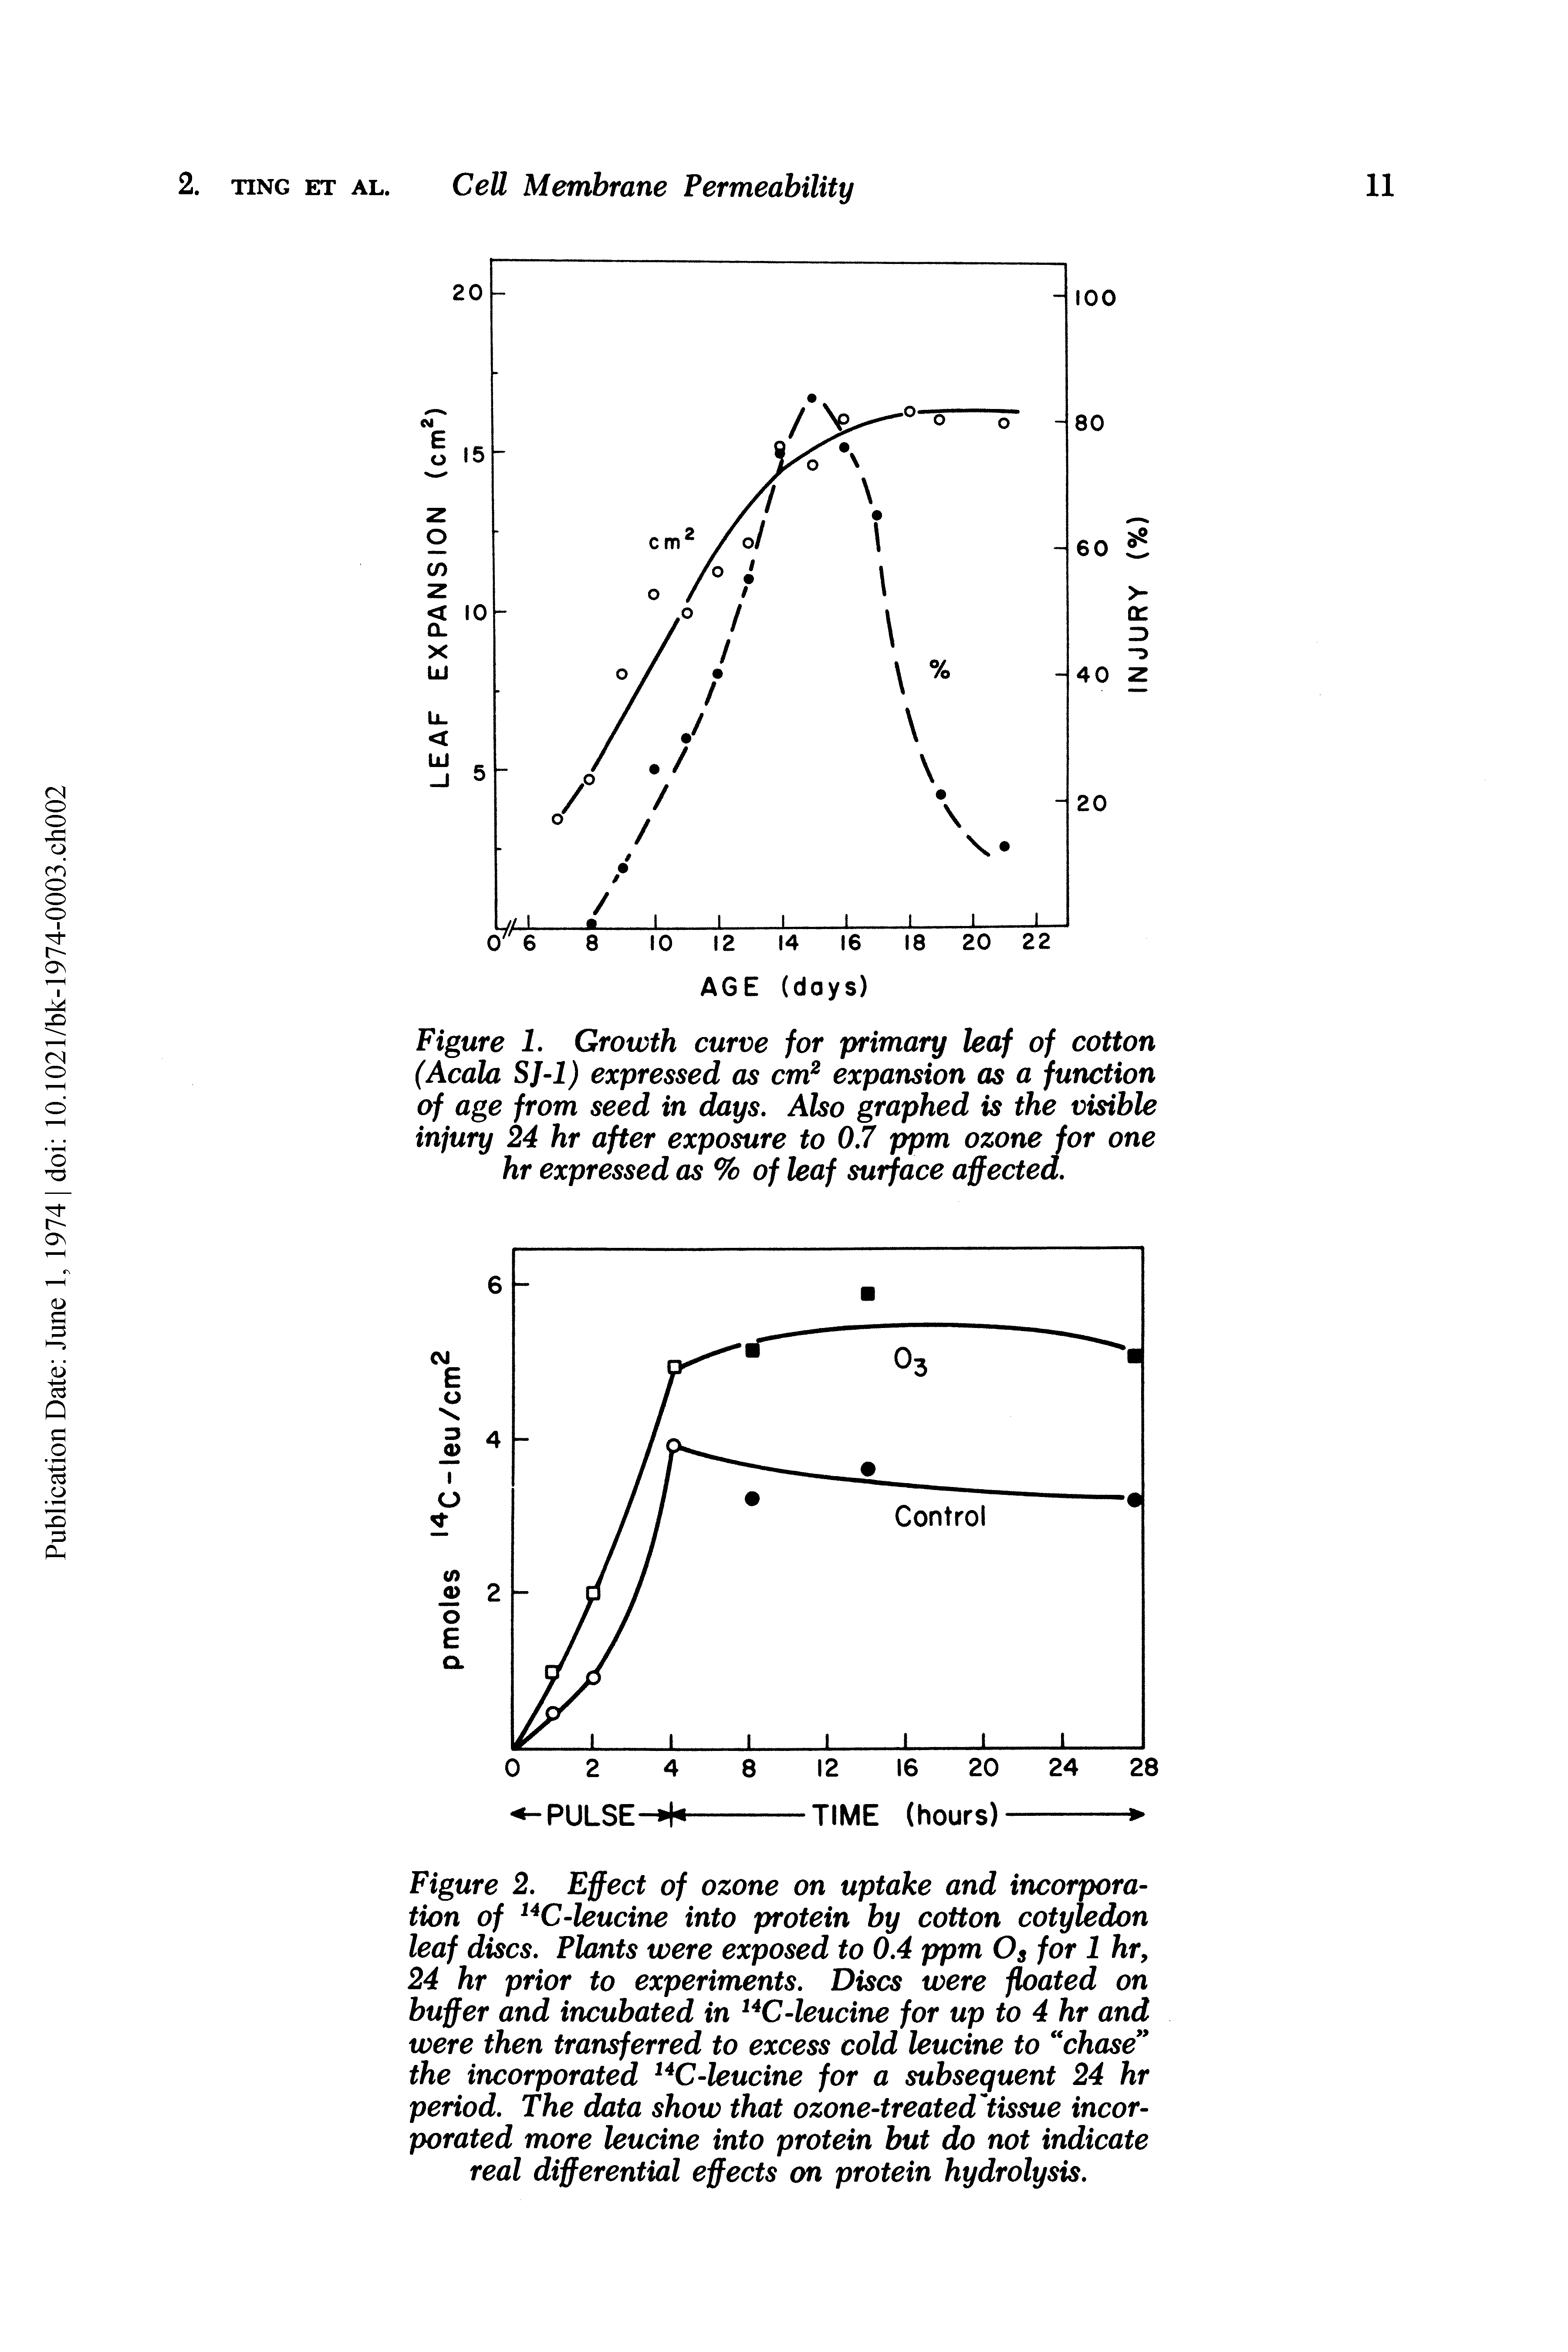 Figure 2. Effect of ozone on uptake and incorporation of -leucine into protein by cotton cotyledon leaf discs. Plants were exposed to 0.4 ppm Os for 1 hr, 24 hr prior to experiments. Discs were floated on buffer and incubated in -leucine for up to 4 hr and were then transferred to excess cold leucine to chase the incorporated C-leucine for a subsequent 24 hr period. The data show that ozone-treated tissue incorporated more leucine into protein but do not indicate real differential effects on protein hydrolysis.